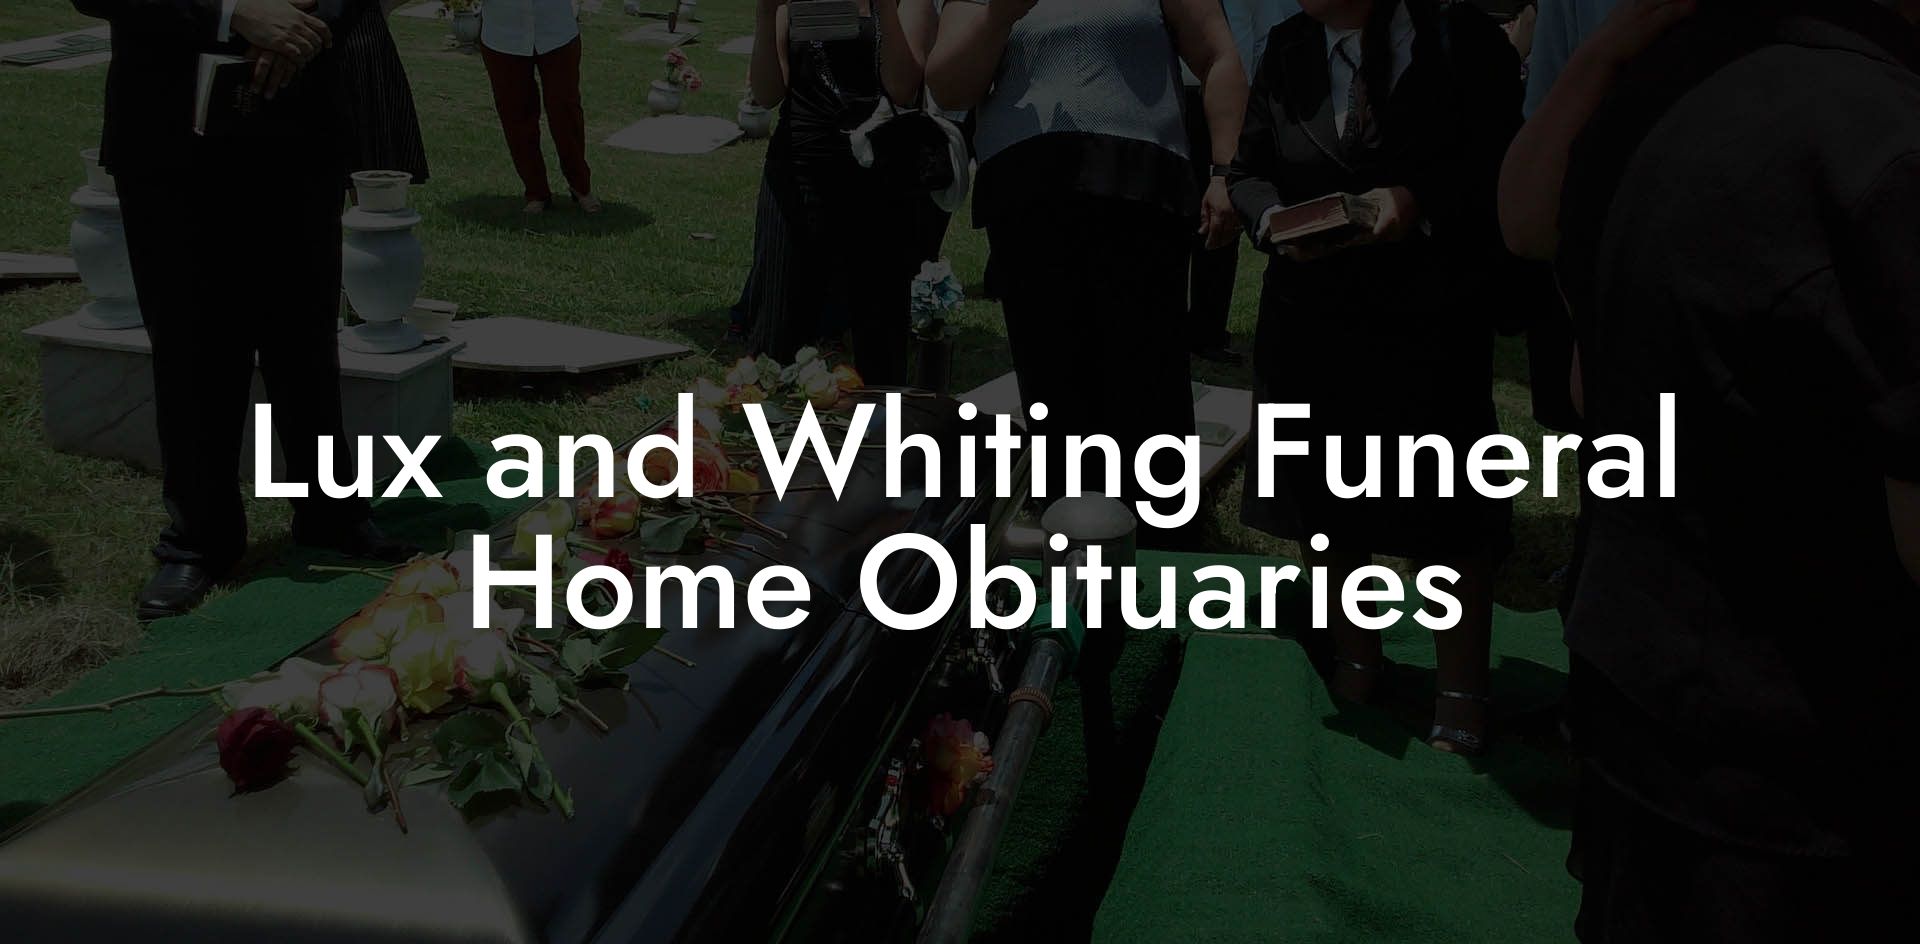 Lux and Whiting Funeral Home Obituaries